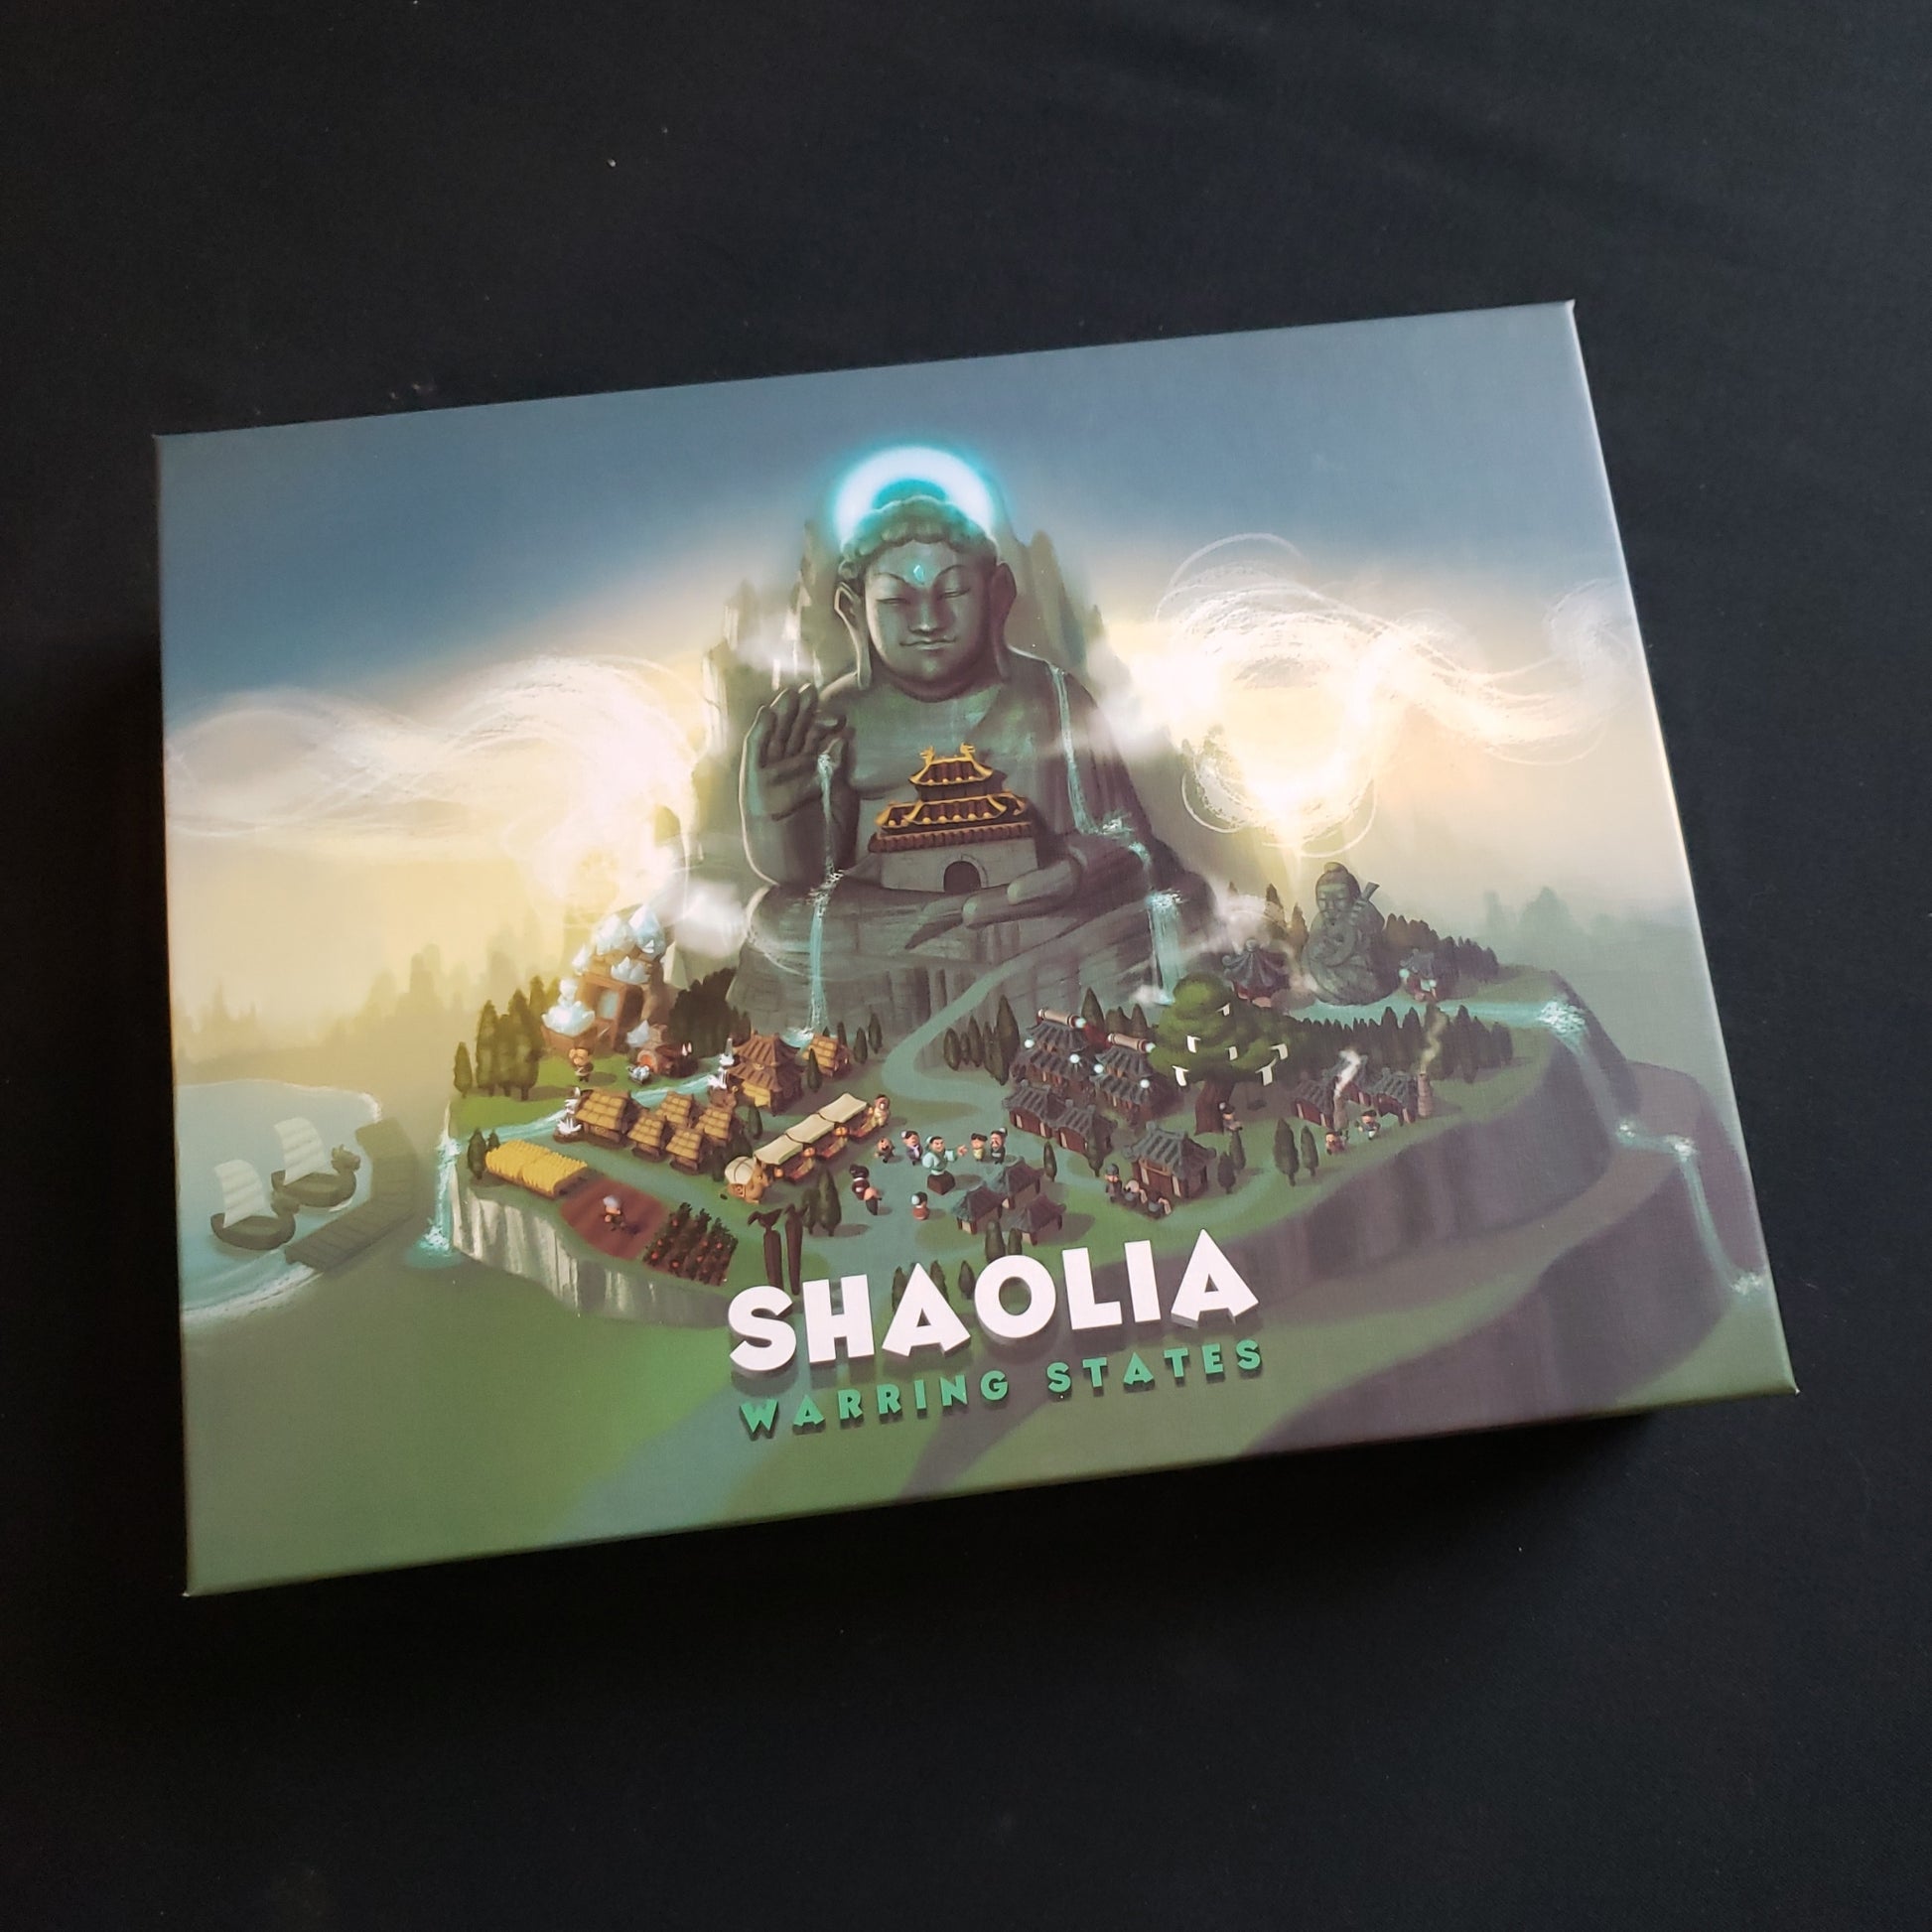 Image shows the front cover of the box of the Shaolia: Warring States board game